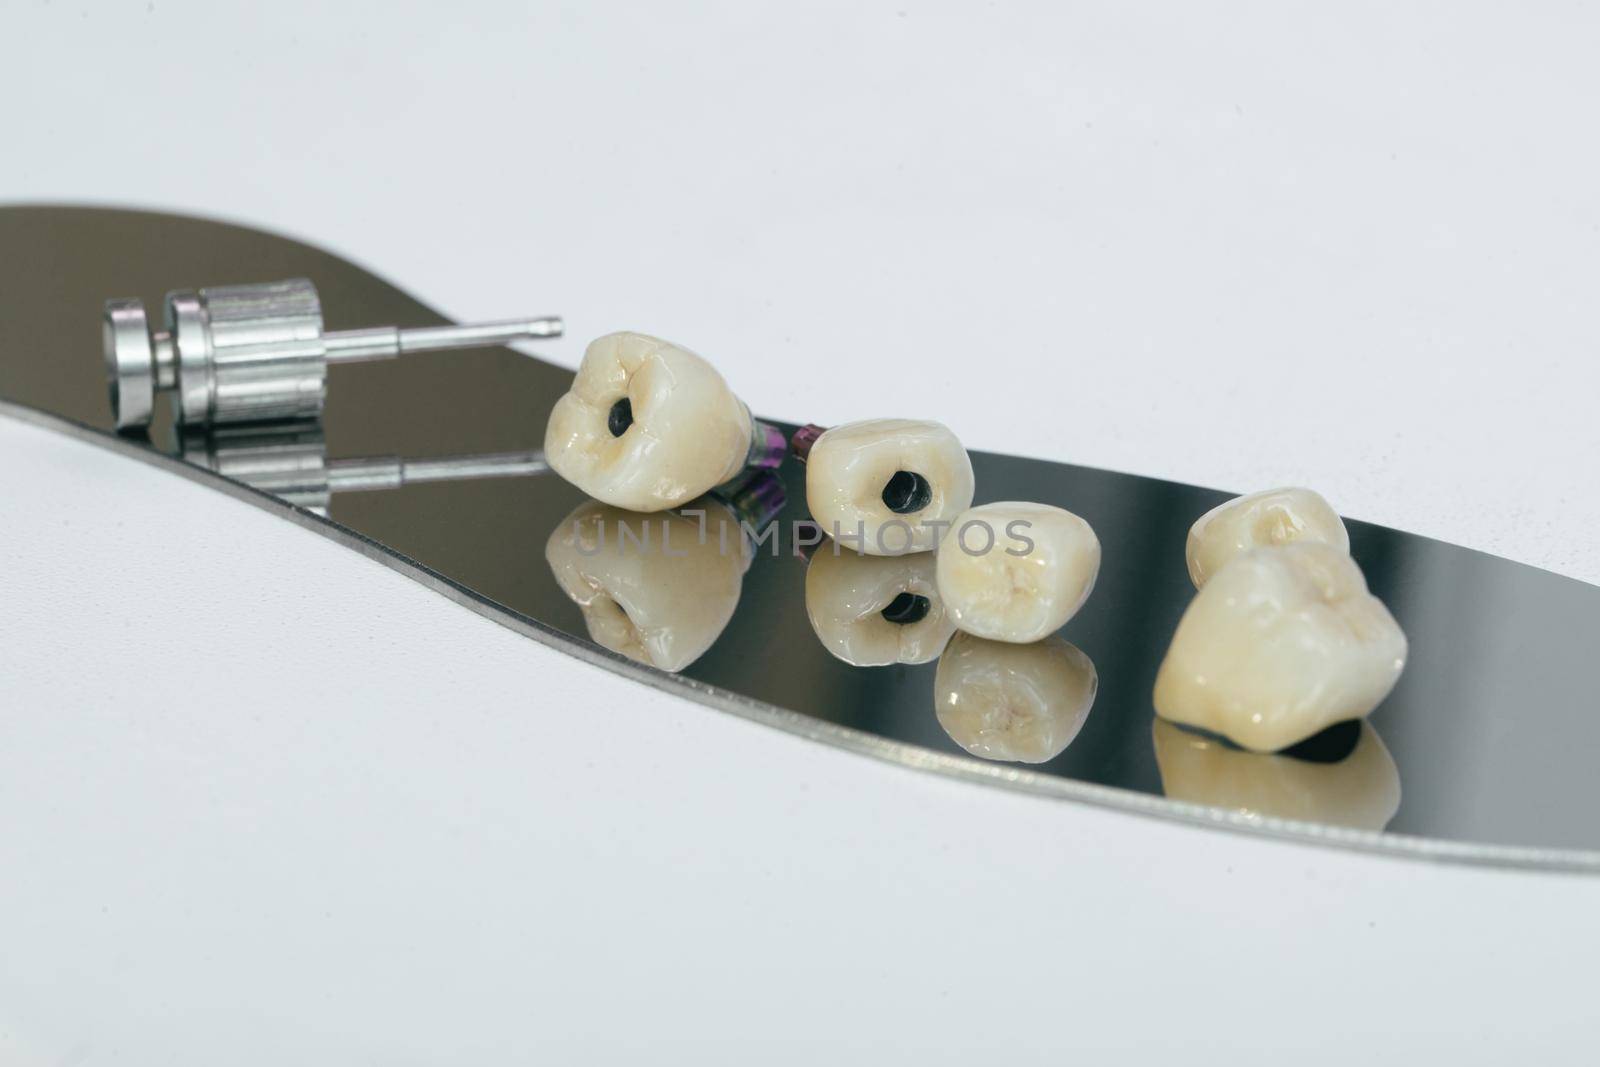 Monolithic screw retained zirconium crown on the implant, a screw and a manual key for screwing the crown. Zirconium crown and zirconium hybrid abutment.